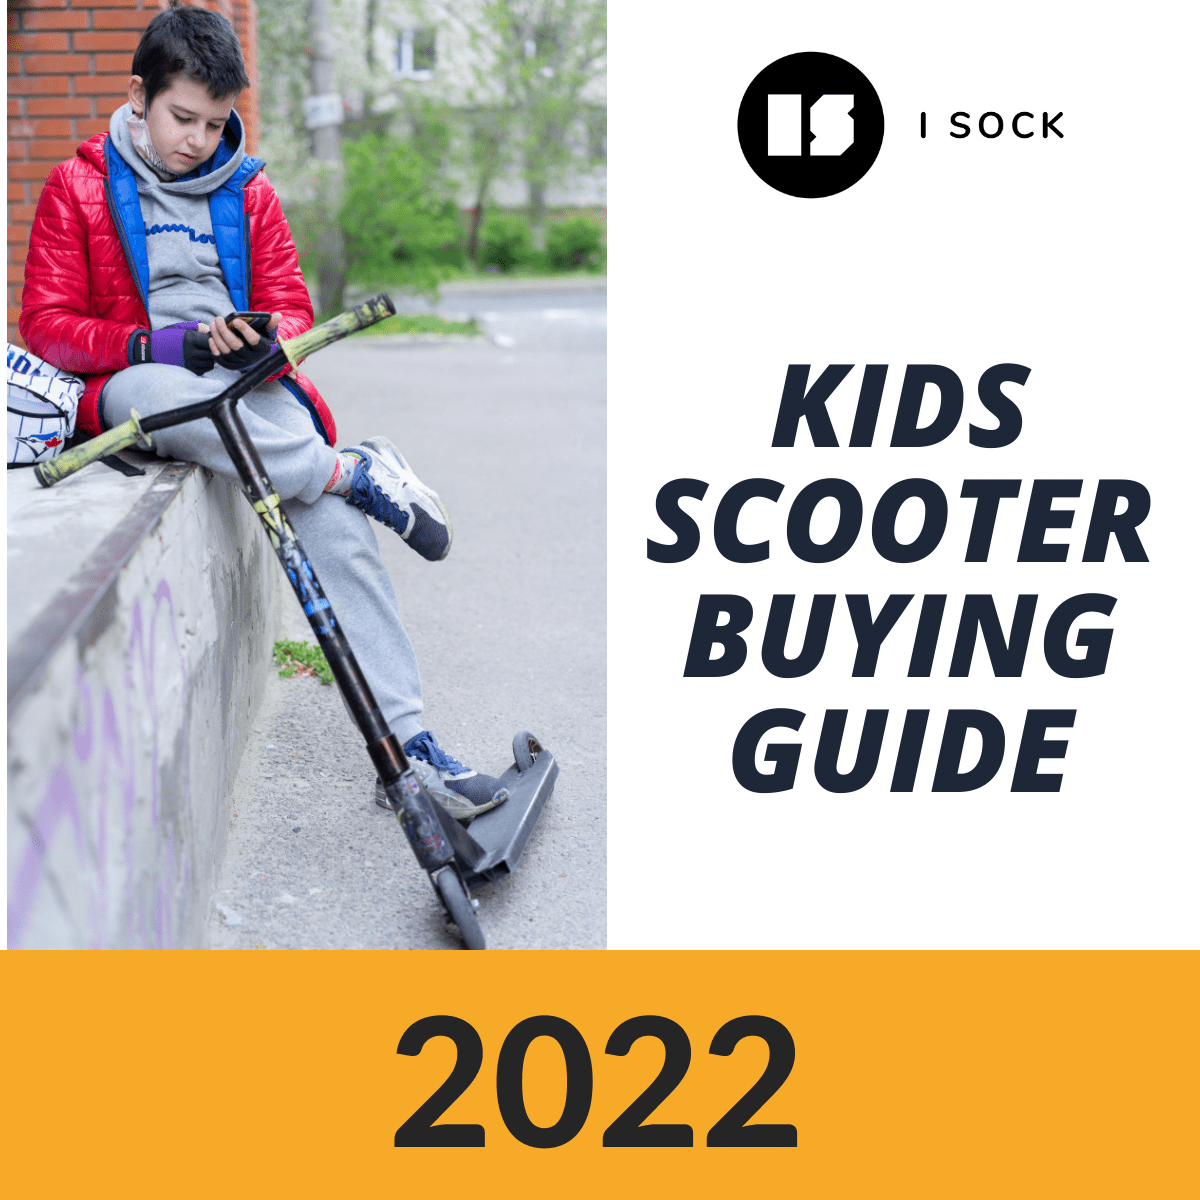 Kids Scooter Buying Guide 2022 featured Image